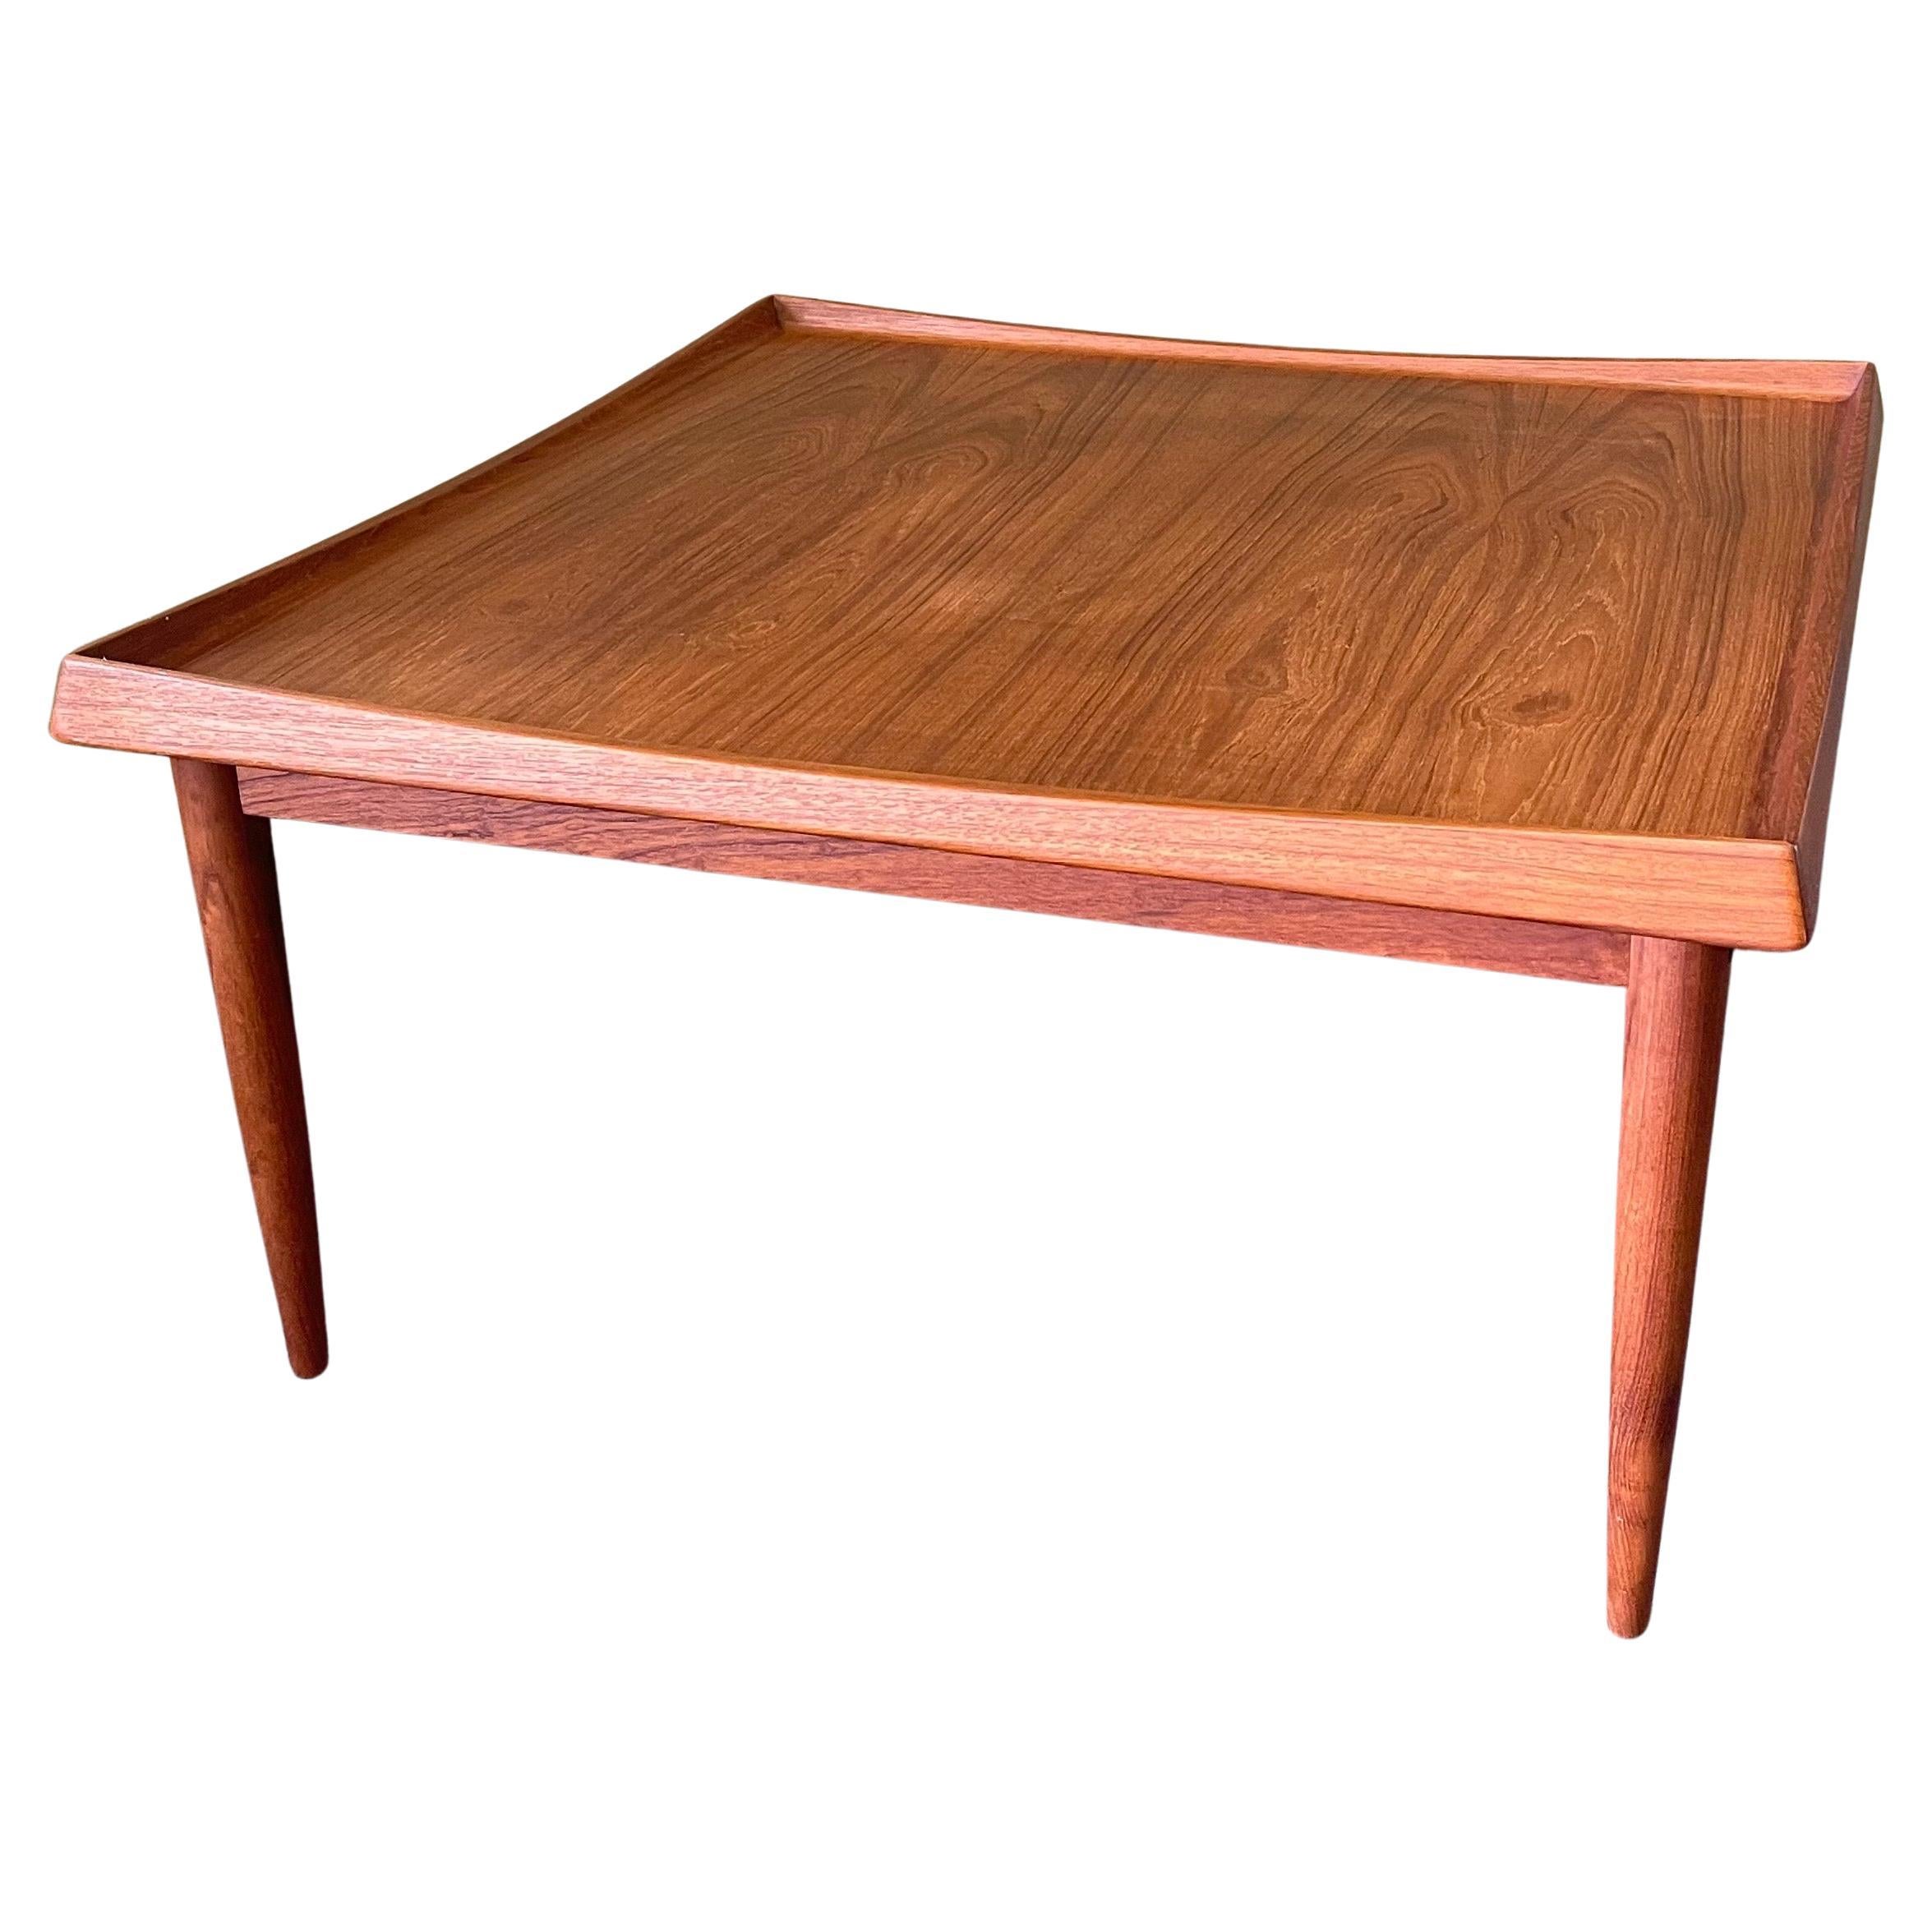 Gorgeous Danish modern solid teak coffee table by Moredo, circa 1960s. The table is in wonderful vintage condition with beautiful teak grain and measures 32